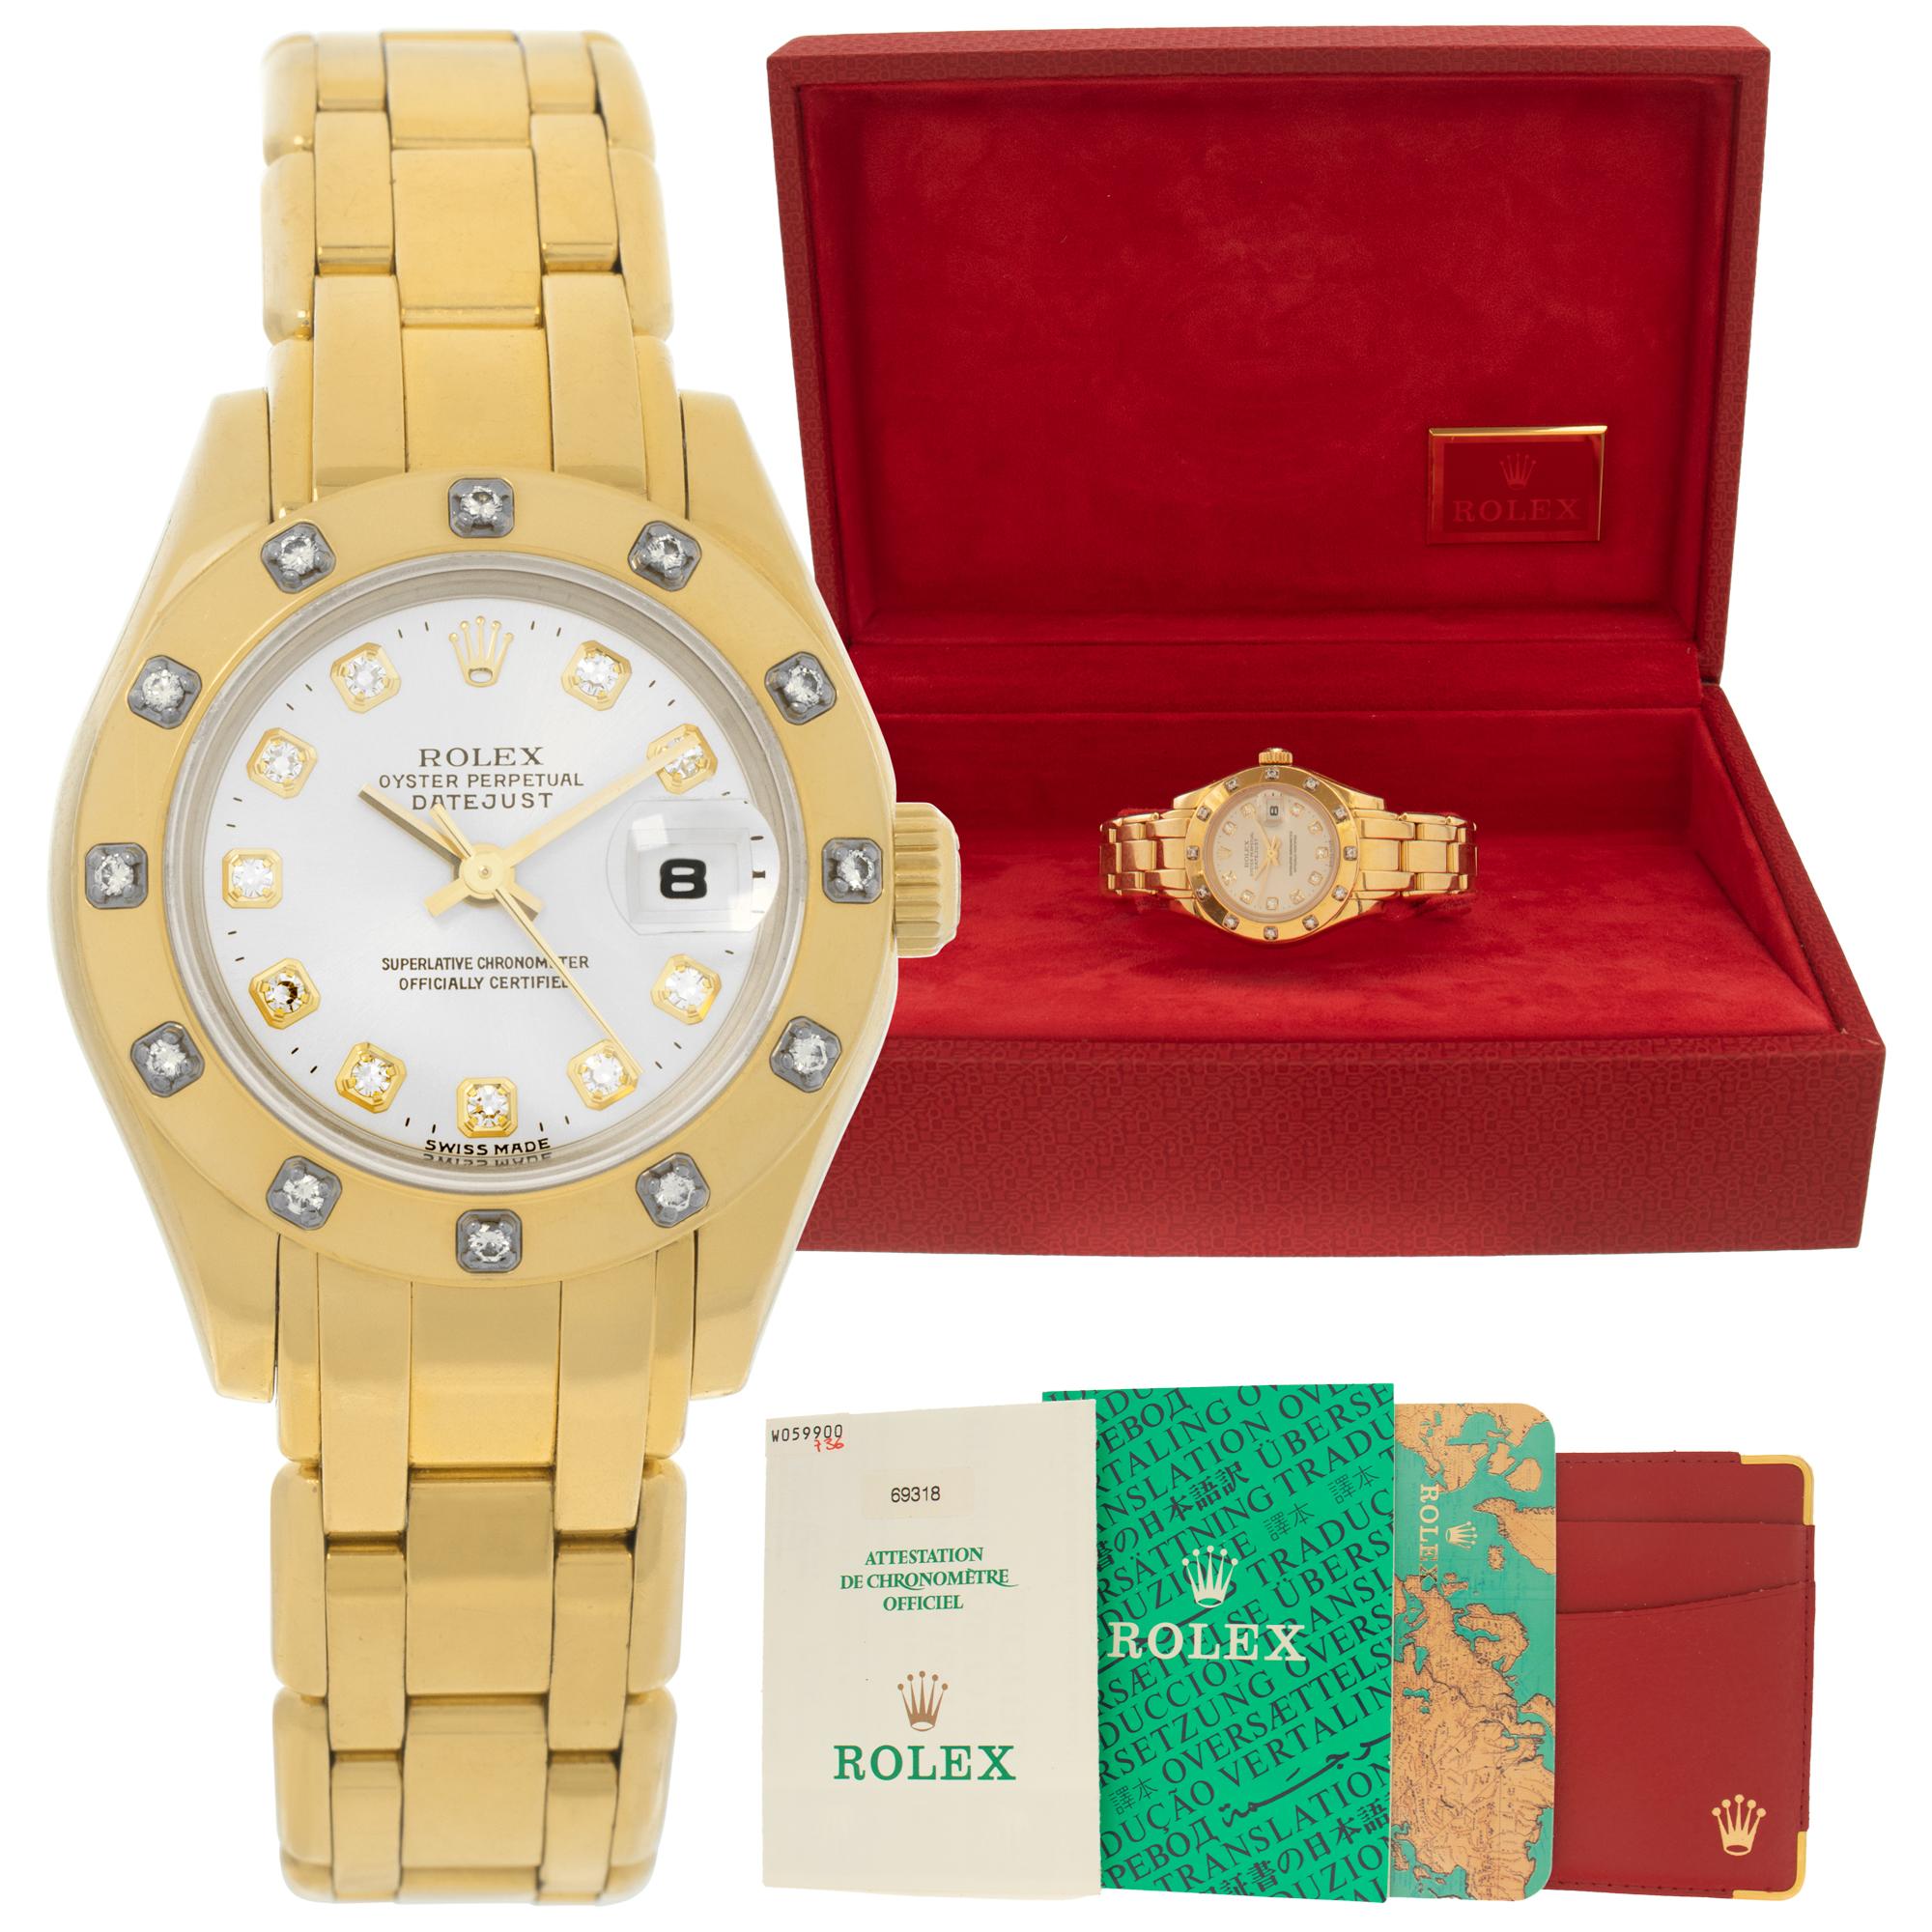 Rolex Pearlmaster 18k yellow gold Automatic Wristwatch Ref 69318 For Sale 3